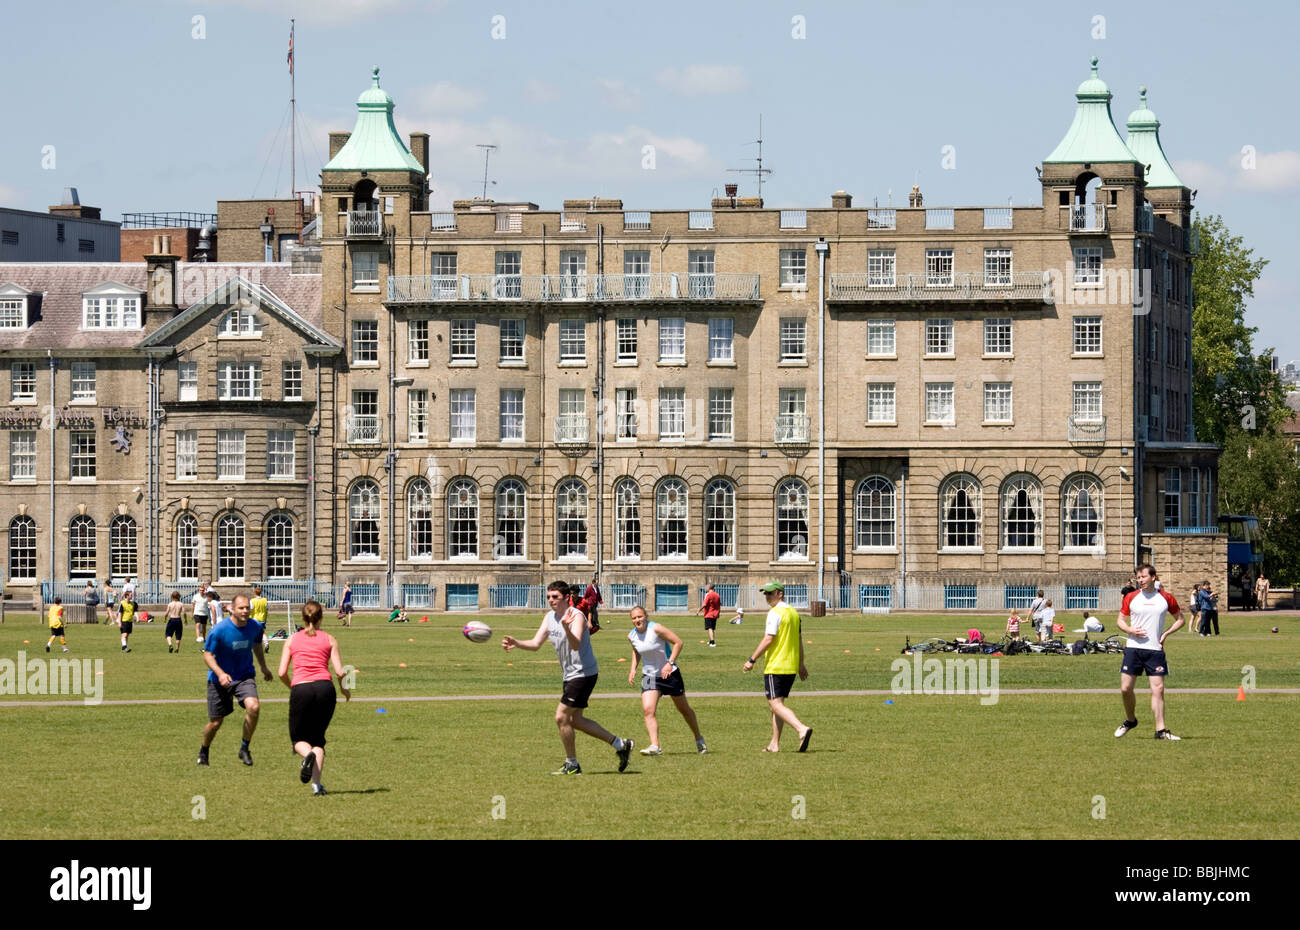 Teenagers playing rugby in front of the University Arms Hotel on Parkers Piece, Cambridge, UK Stock Photo